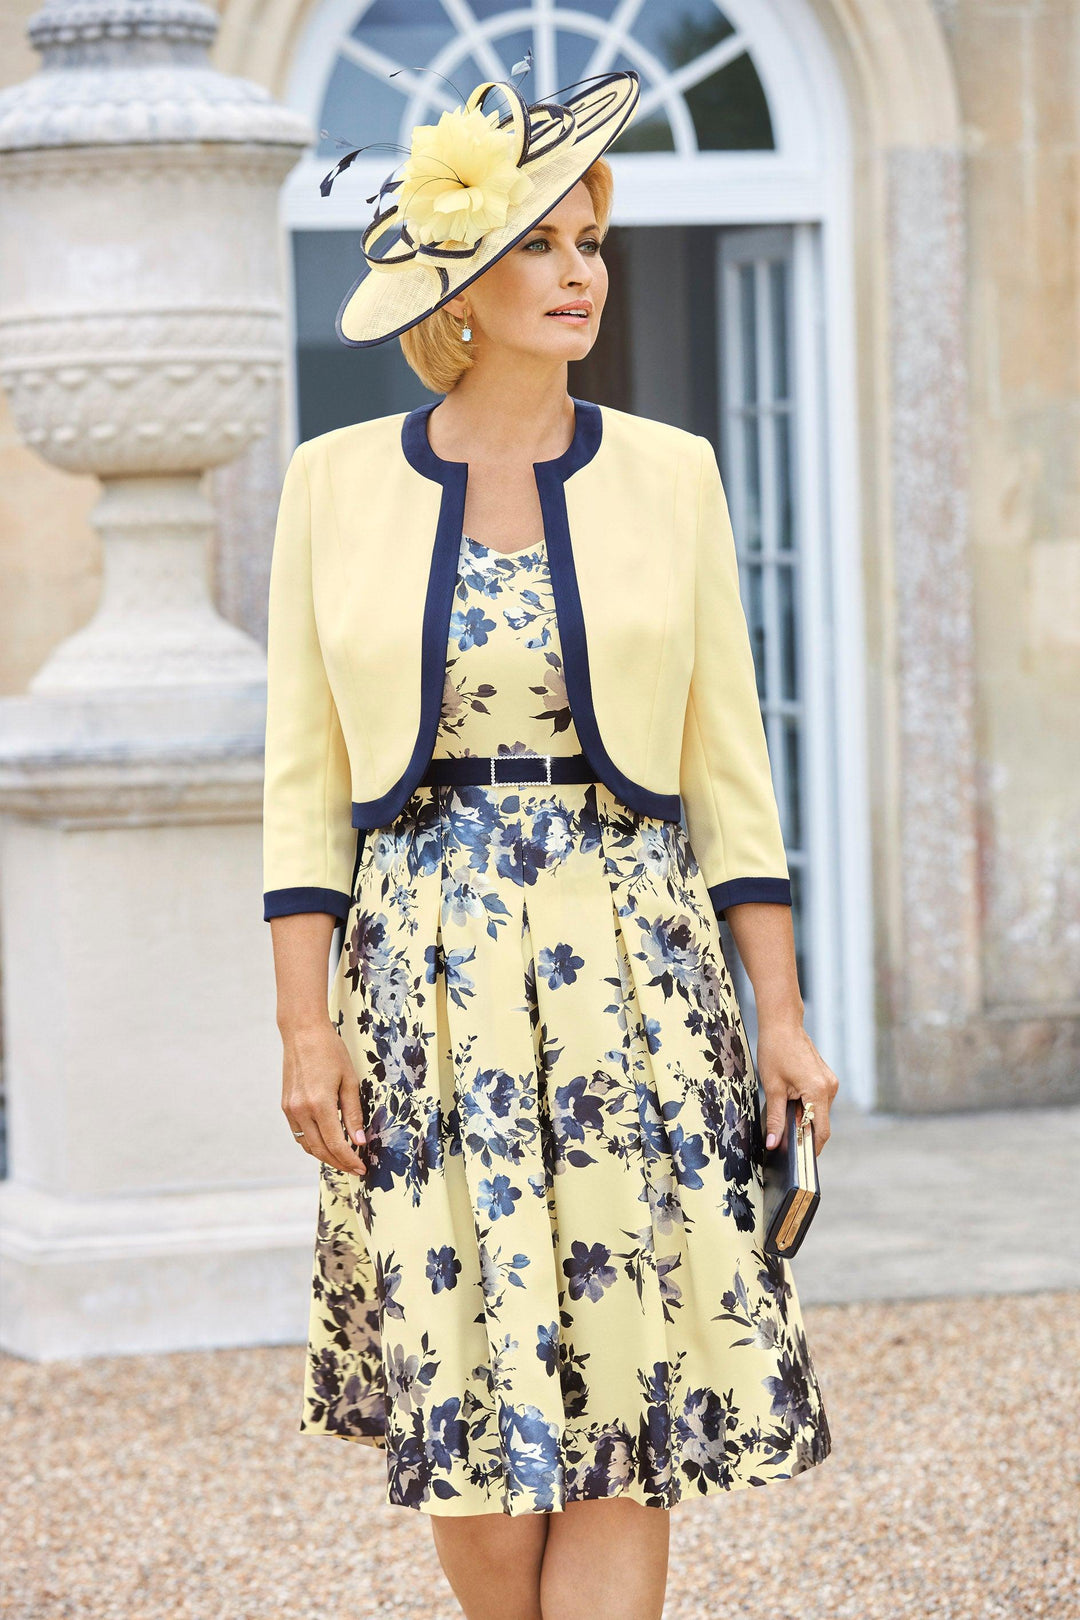 Condici - 70979 - Dress & Jacket Dress, Floral, Formal dresses, Mother of the bride, Mother of the groom, Navy, wedding guest dresses, Yellow ginasmartboutique